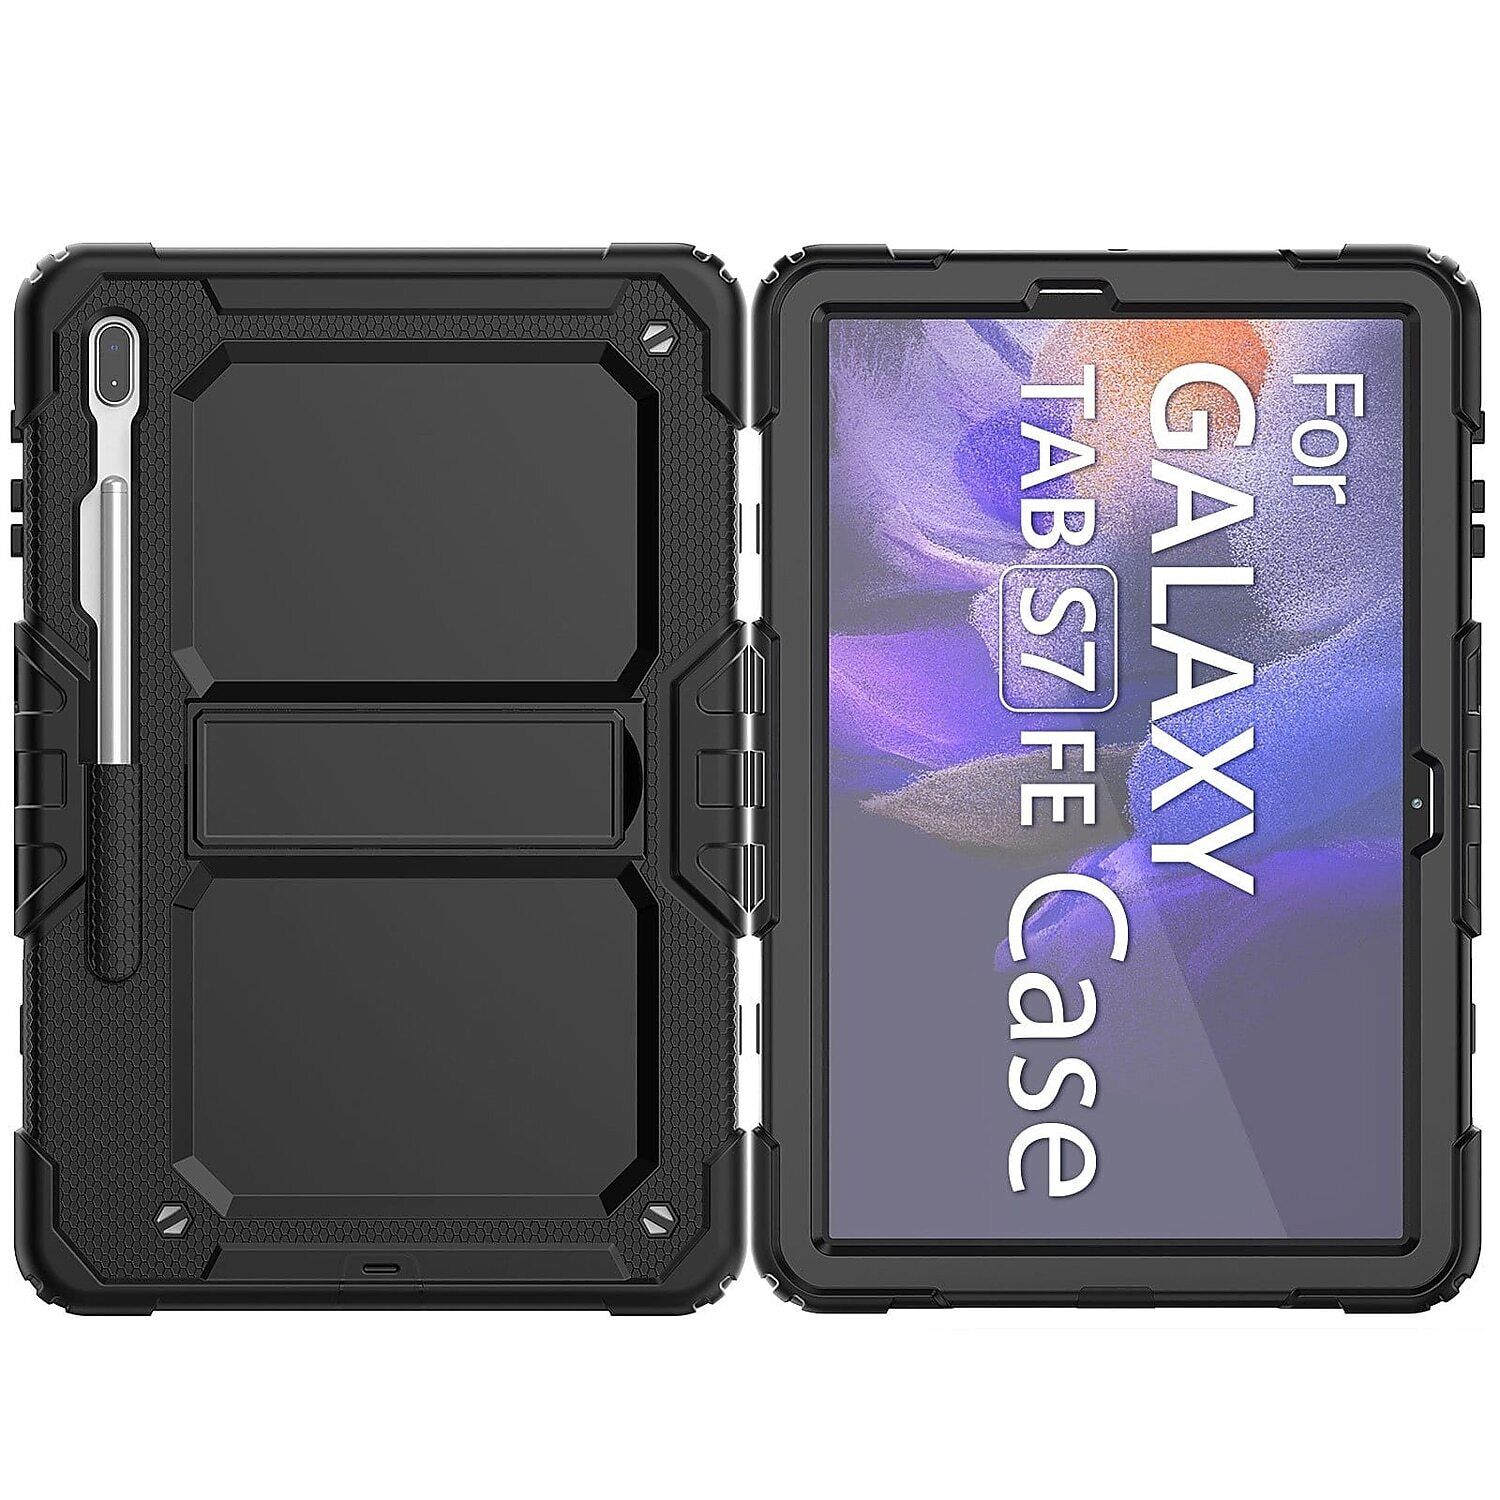 SaharaCase Defence Series Case for Samsung Galaxy Tab S7 FE and Tab S8 Plus